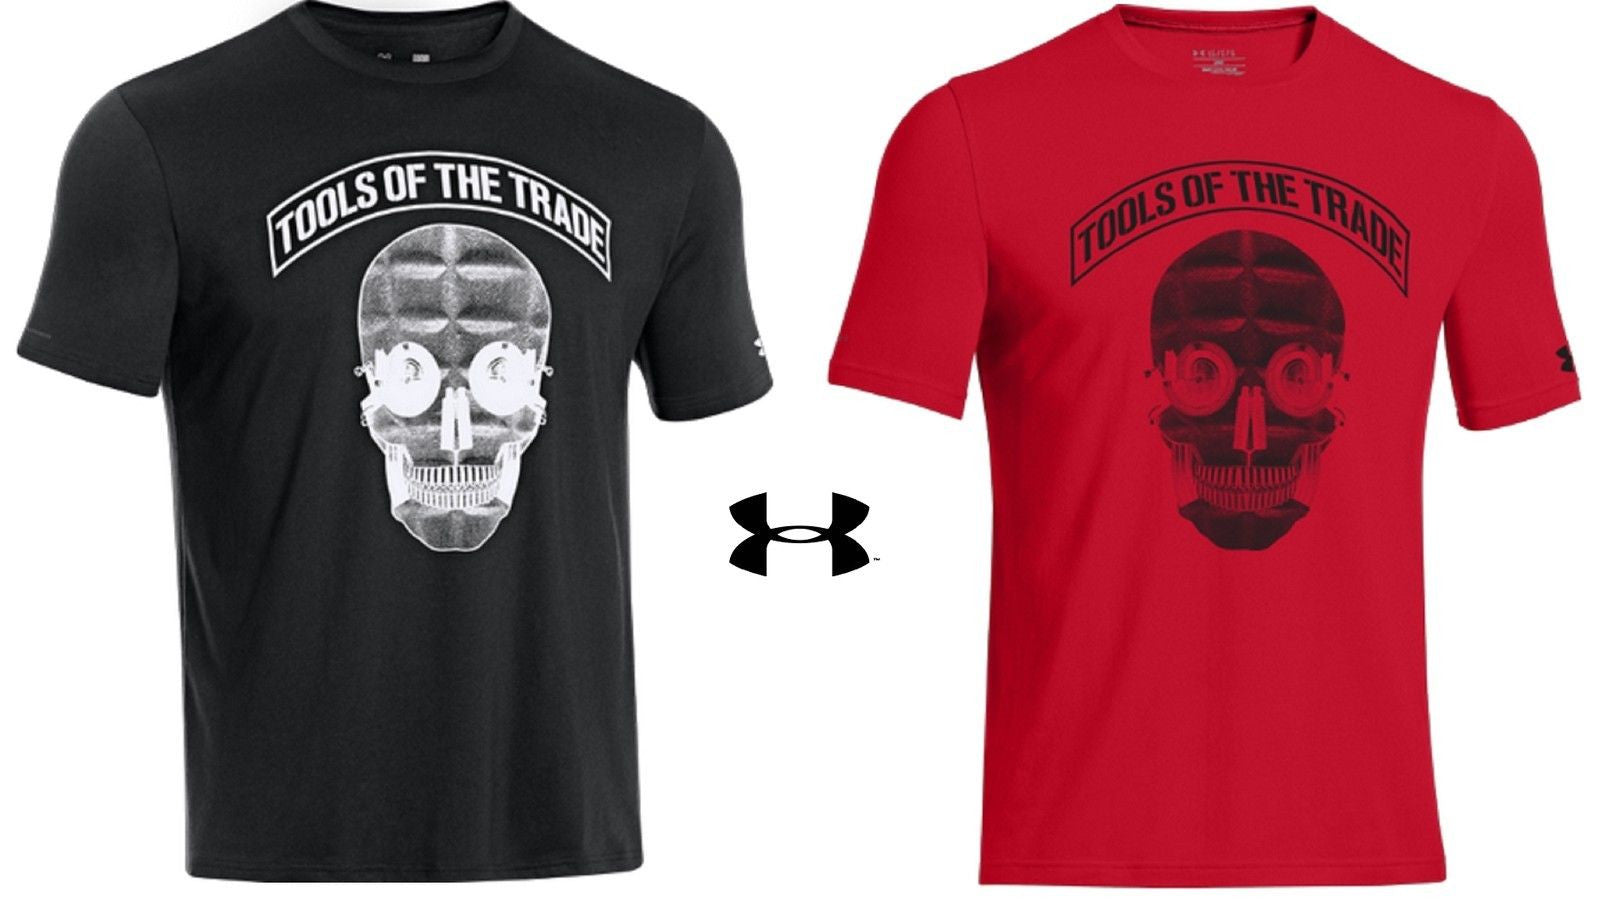 under armour moisture wicking t shirts